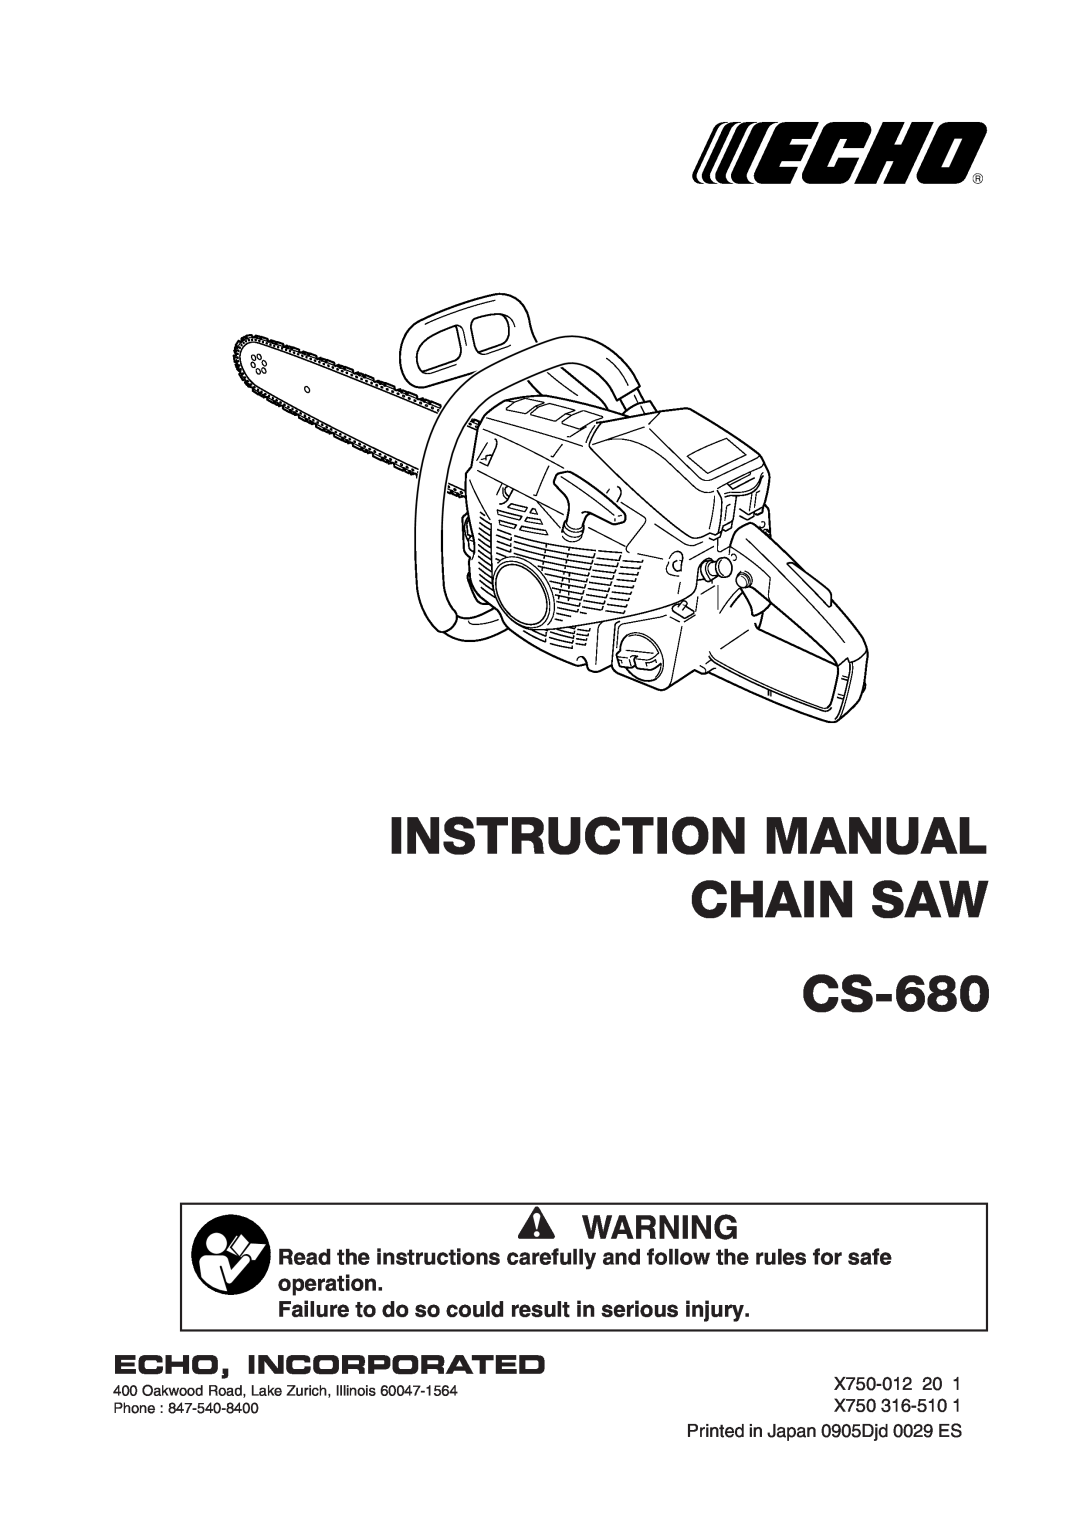 Echo CS-680 instruction manual Failure to do so could result in serious injury, Echo, Incorporated, Phone 